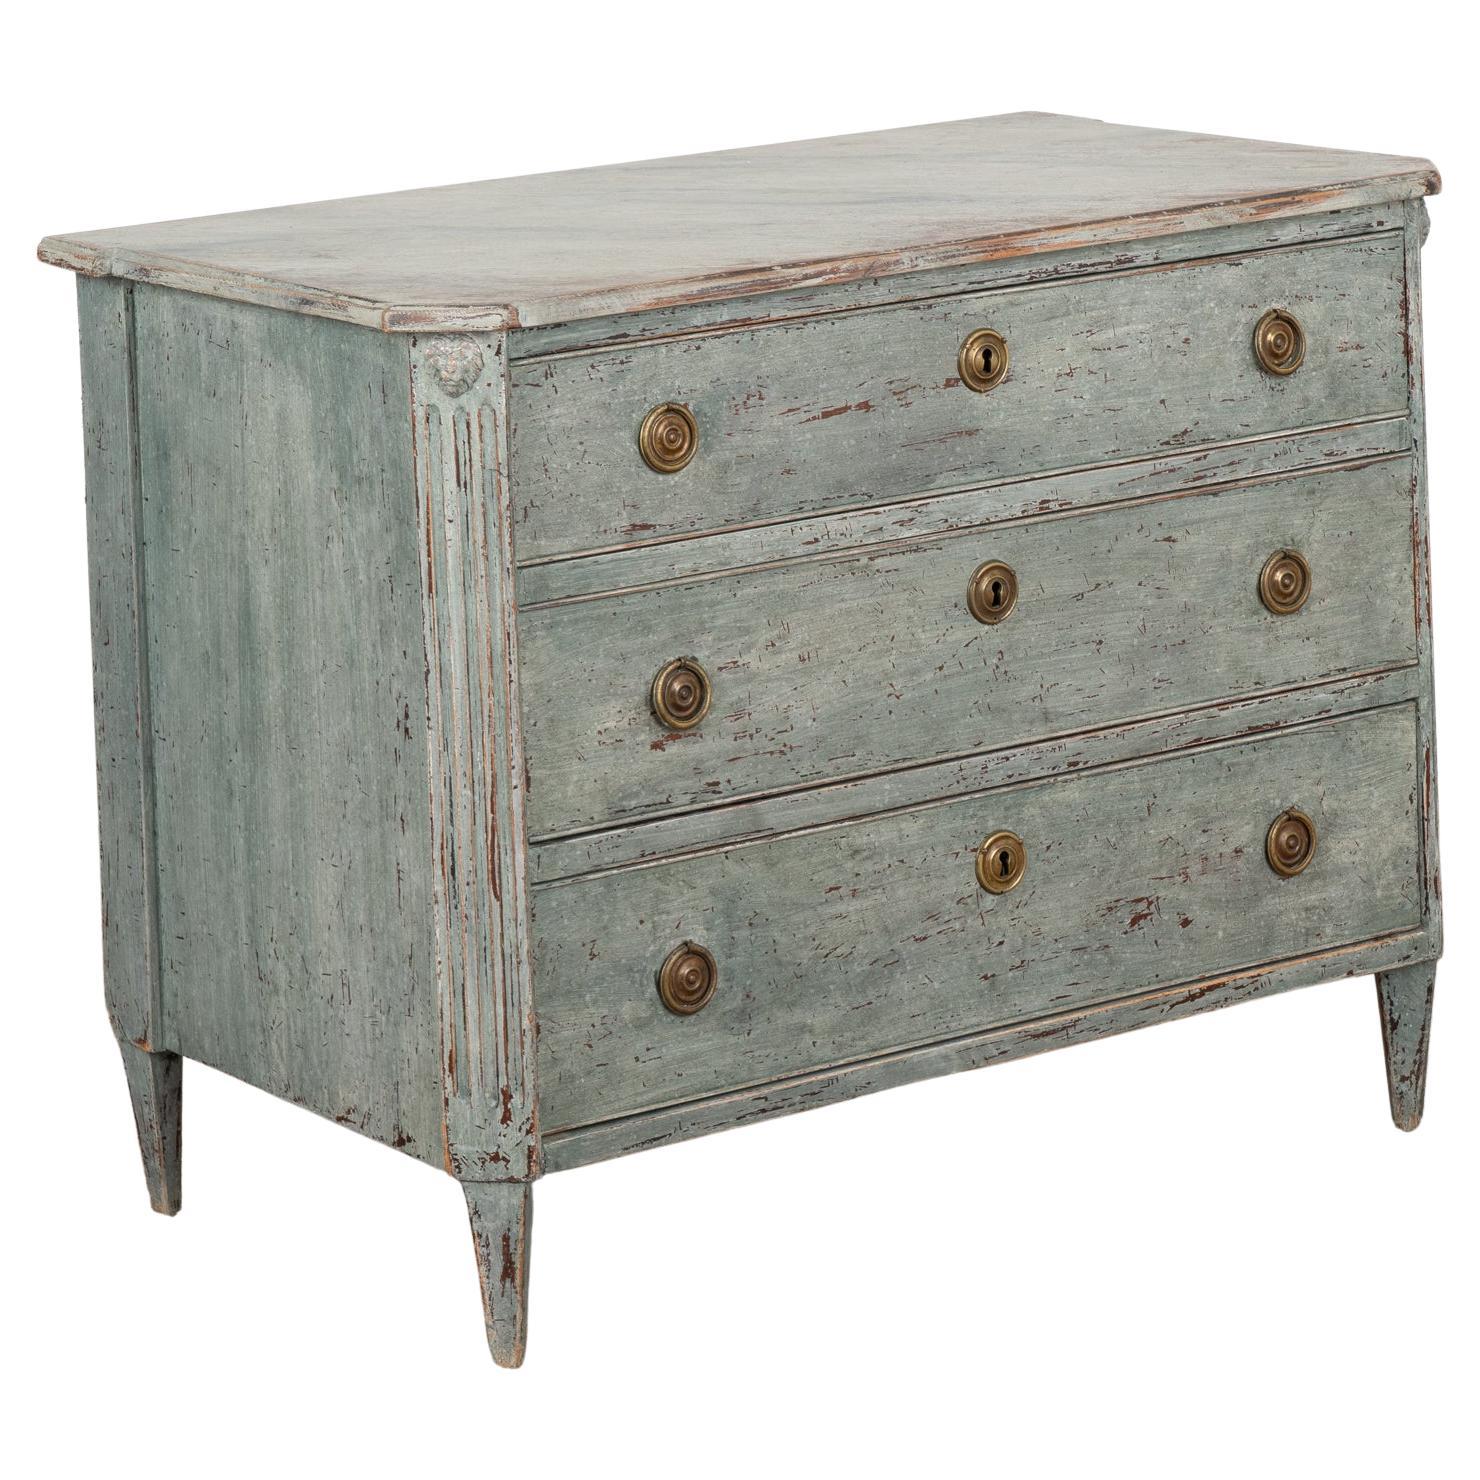 Blue Painted Chest of Three Drawers, Sweden circa 1820-40